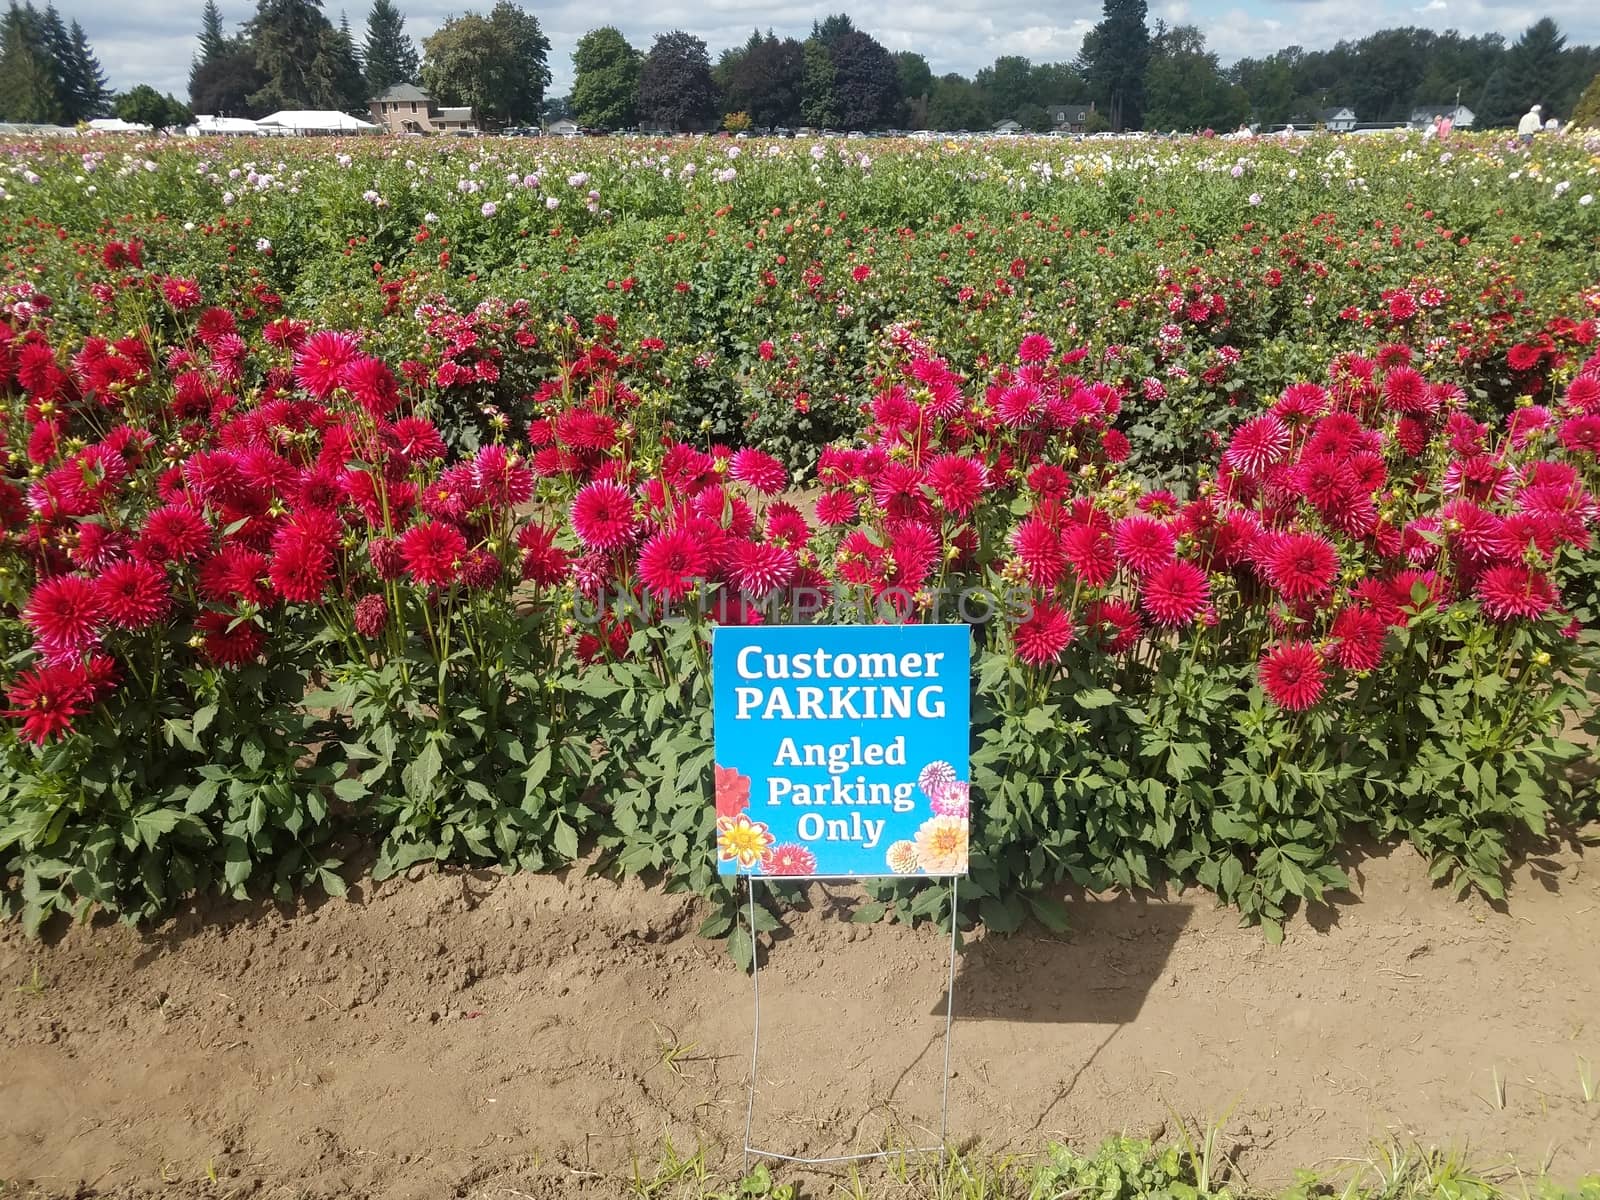 customer parking angled parking only sign and colorful dahlia field